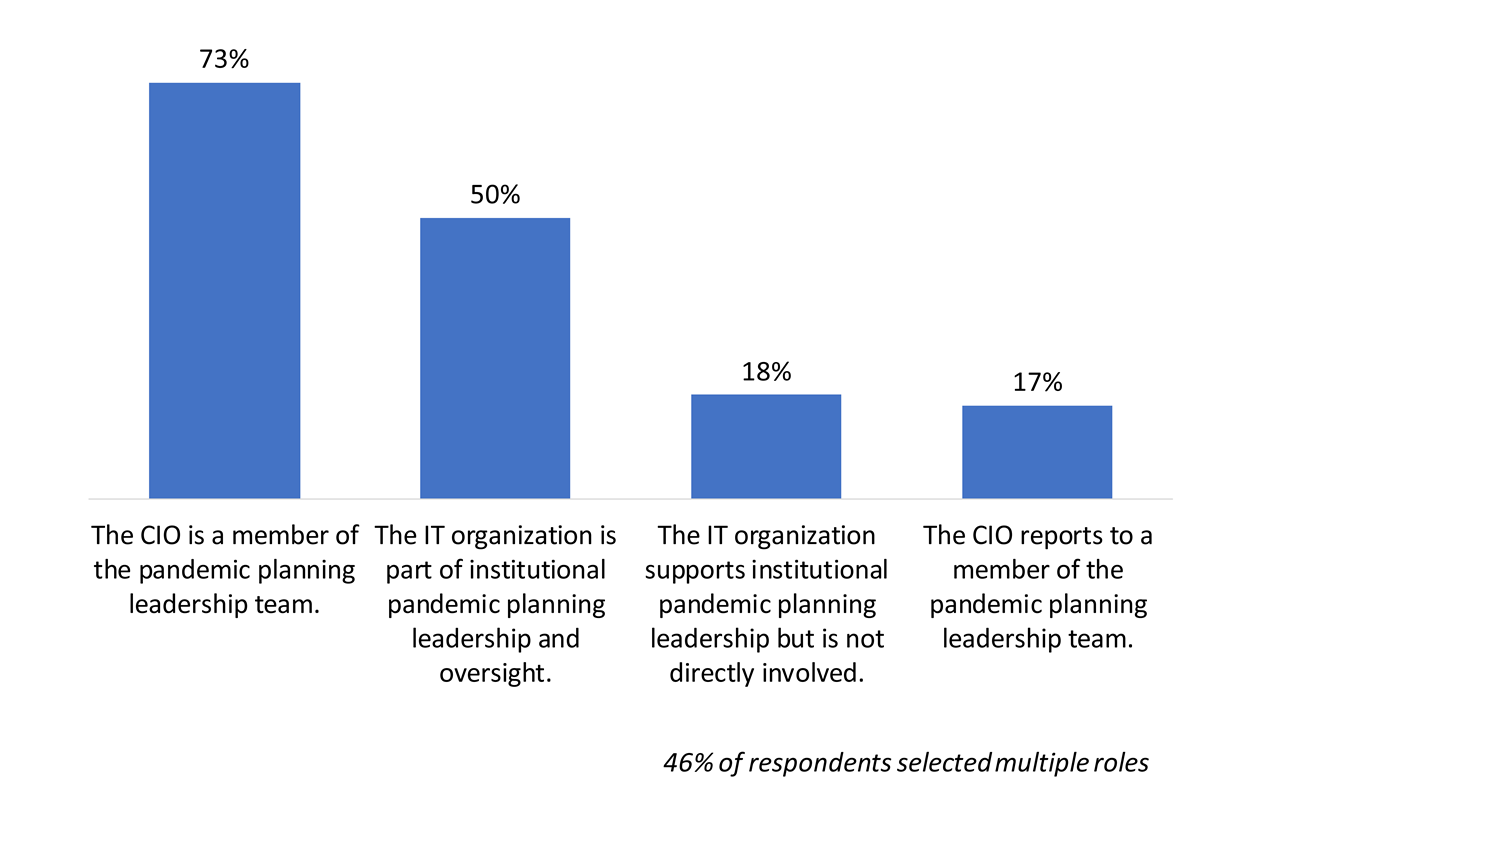 Bar chart illustrating the role of the CIO and IT organization in institutional fall pandemic planning and response